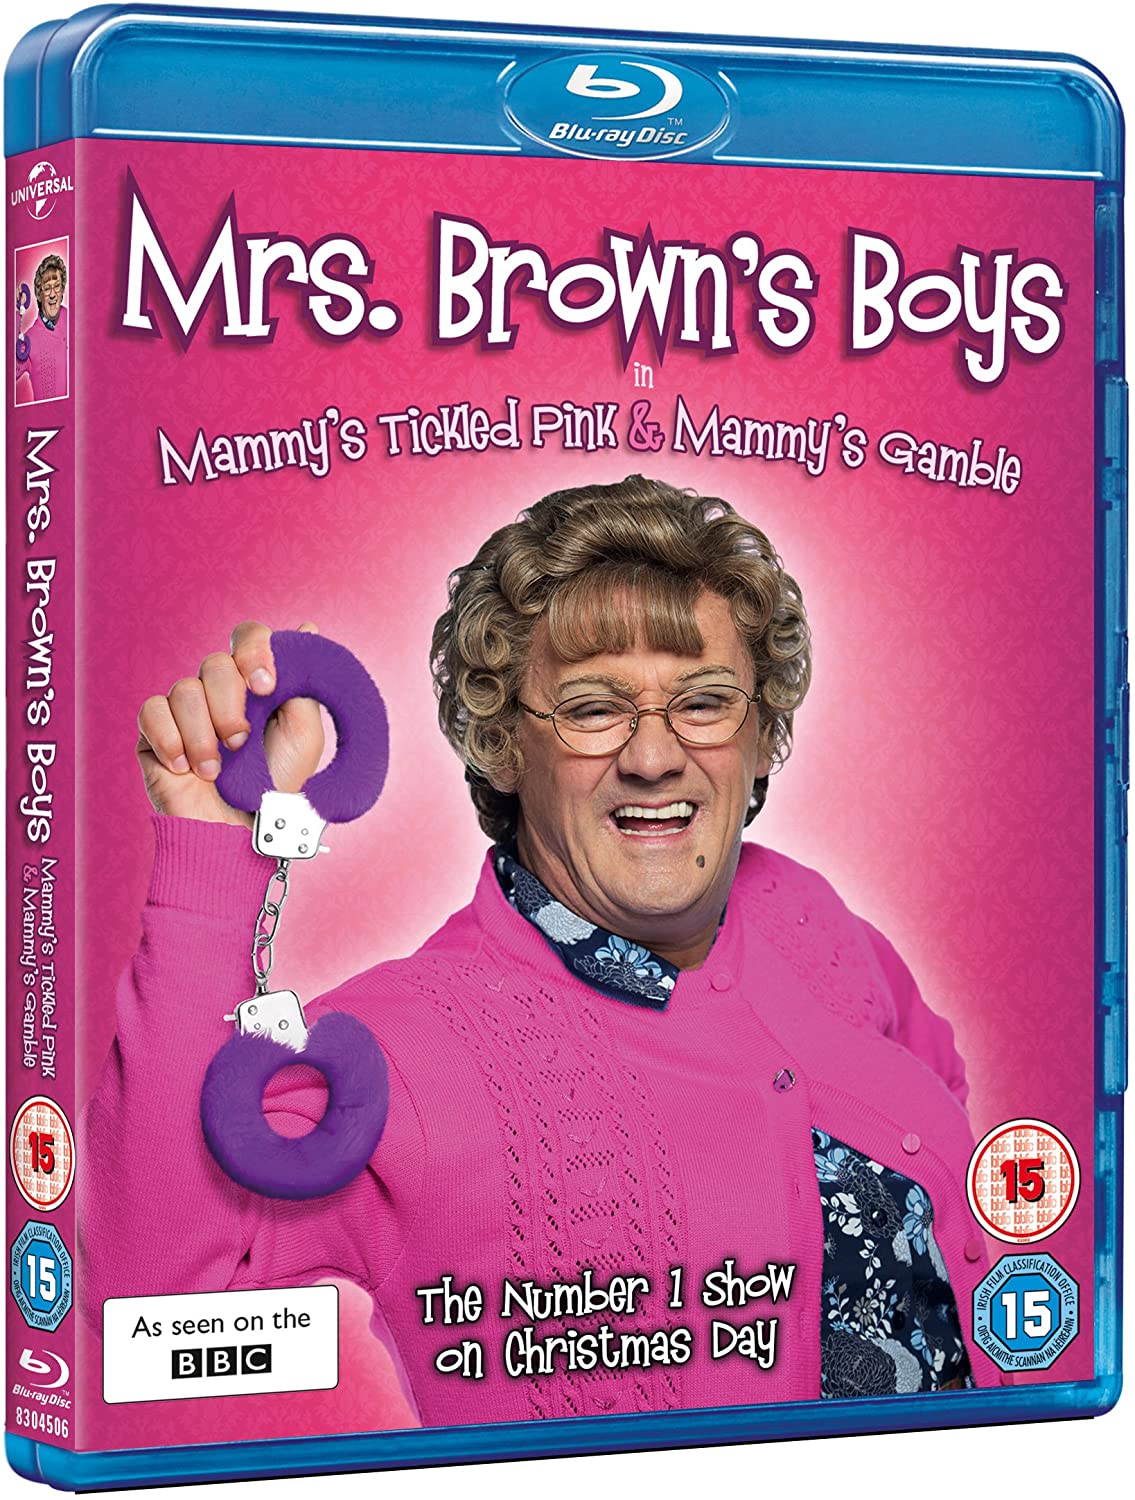 Mrs Brown's Boys: Mammy's Tickled Pink/Mammy's Gamble (Blu-ray)